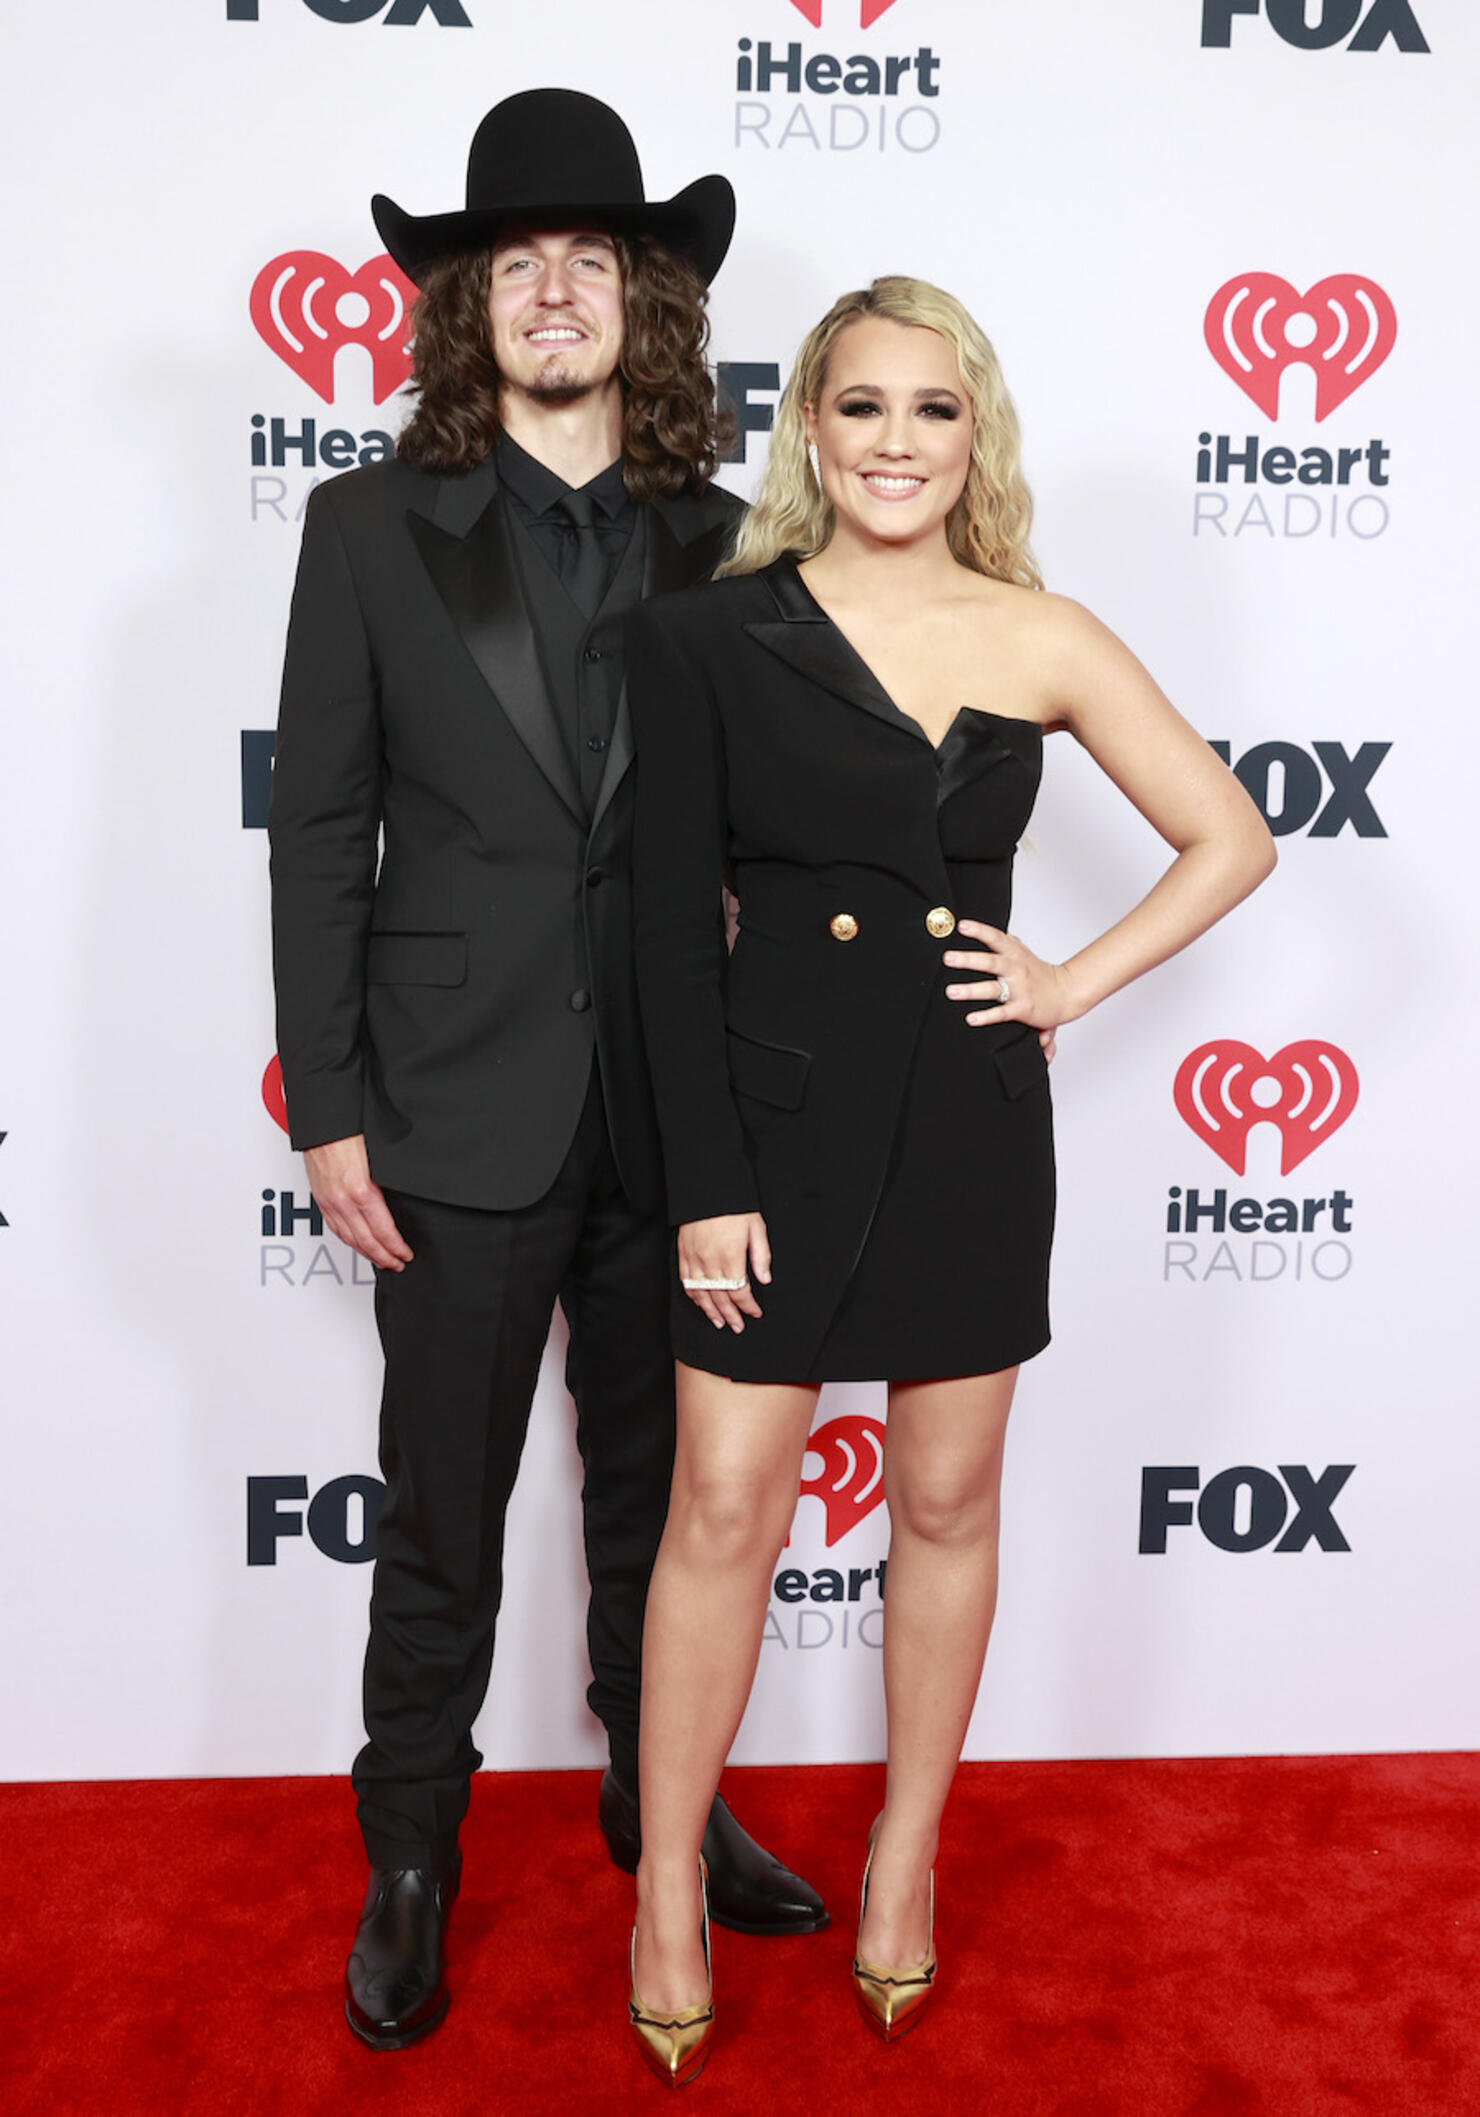 All Of The Best 2021 iHeartRadio Awards Red Carpet Looks